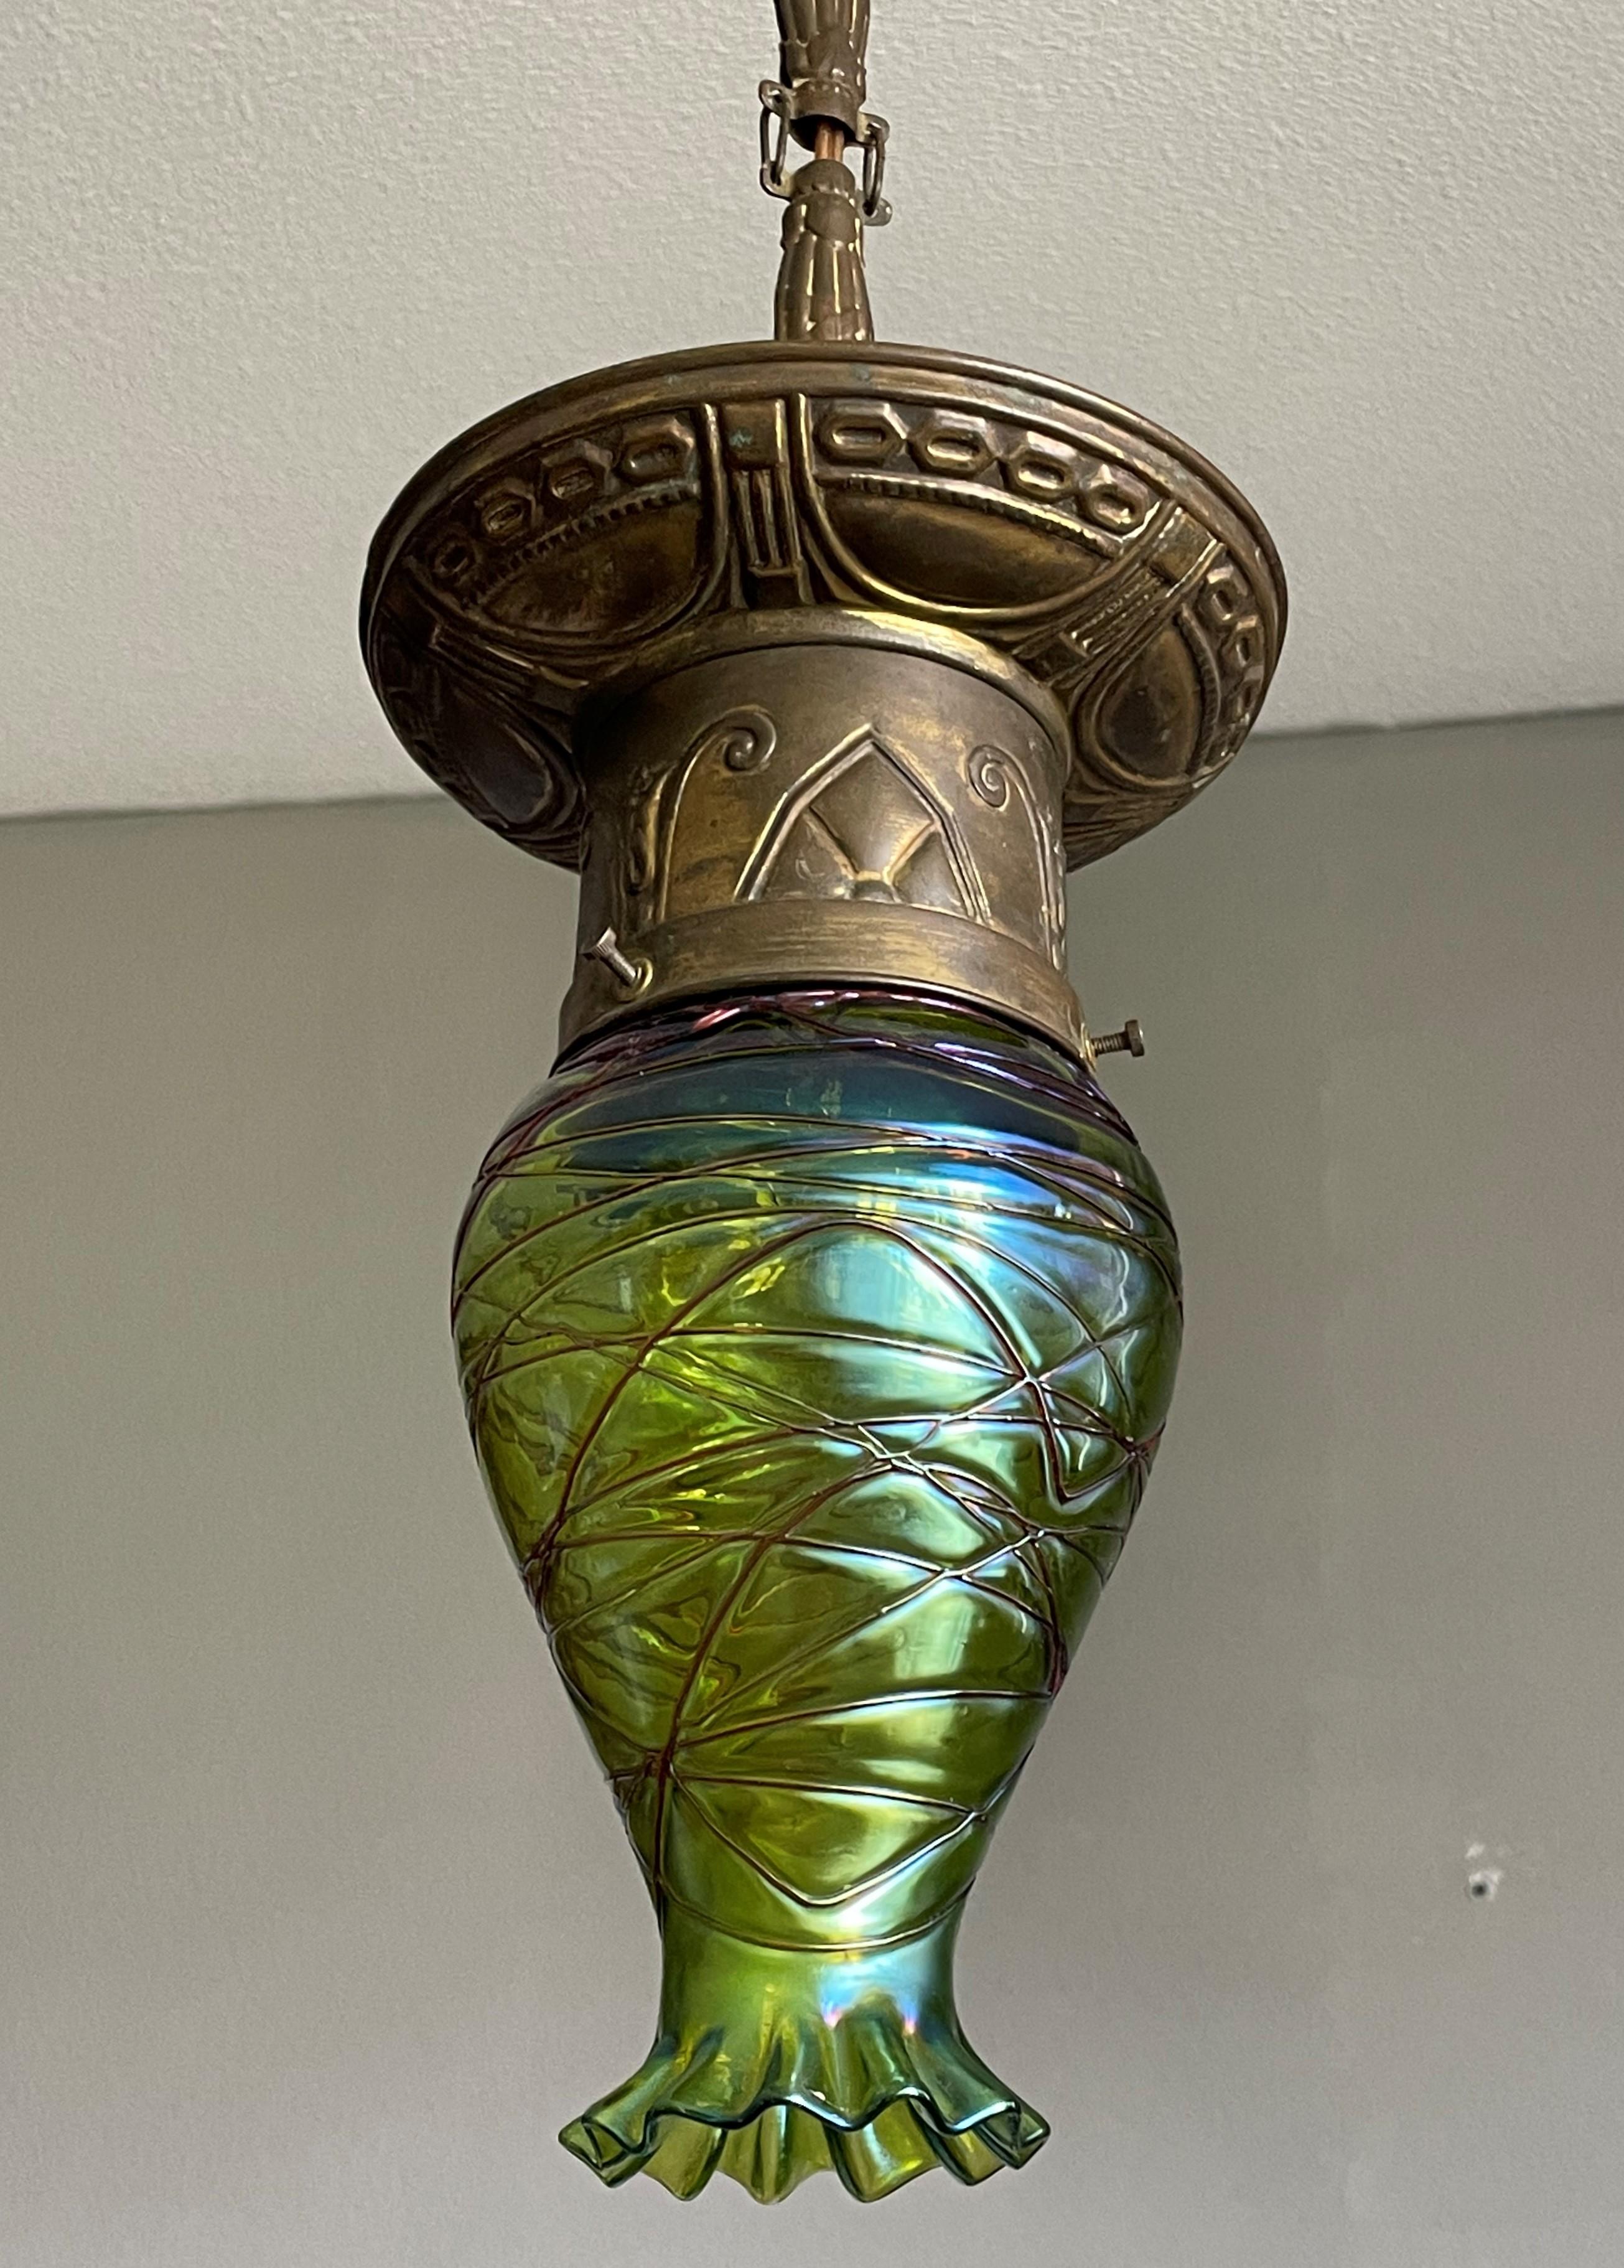 Stunning little antique hallway pendant light for the collectors of rare and beautiful.

This elegant and all handcrafted light fixture is one of the earliest Arts & Crafts lights that we ever had the pleasure of offering. The beautifully